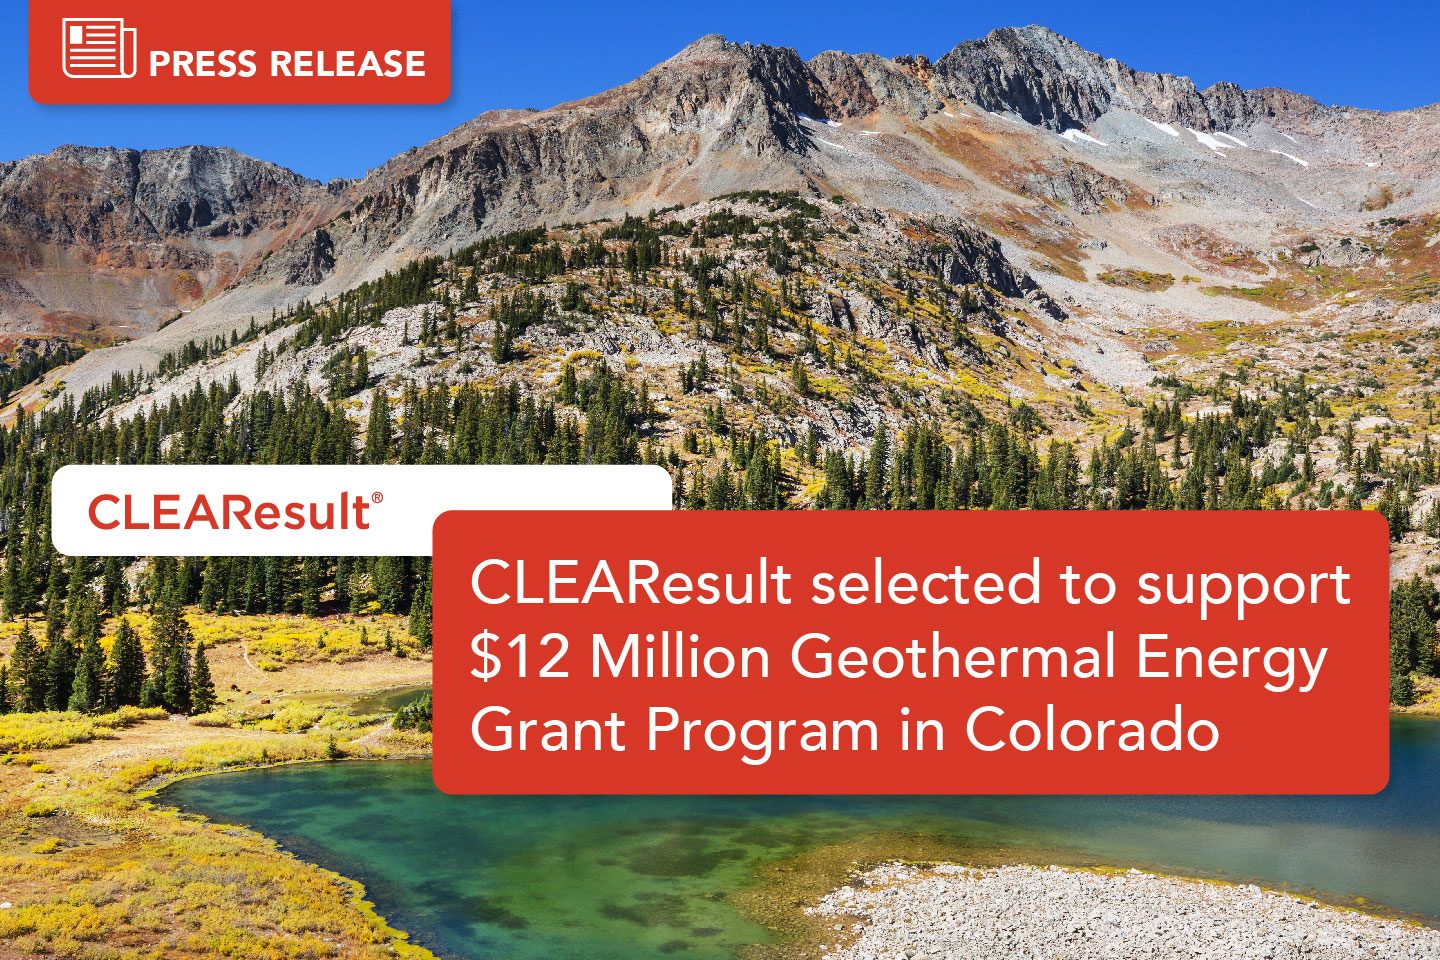 CLEAResult selected to support $12 Million Geothermal Energy Grant Program in Colorado